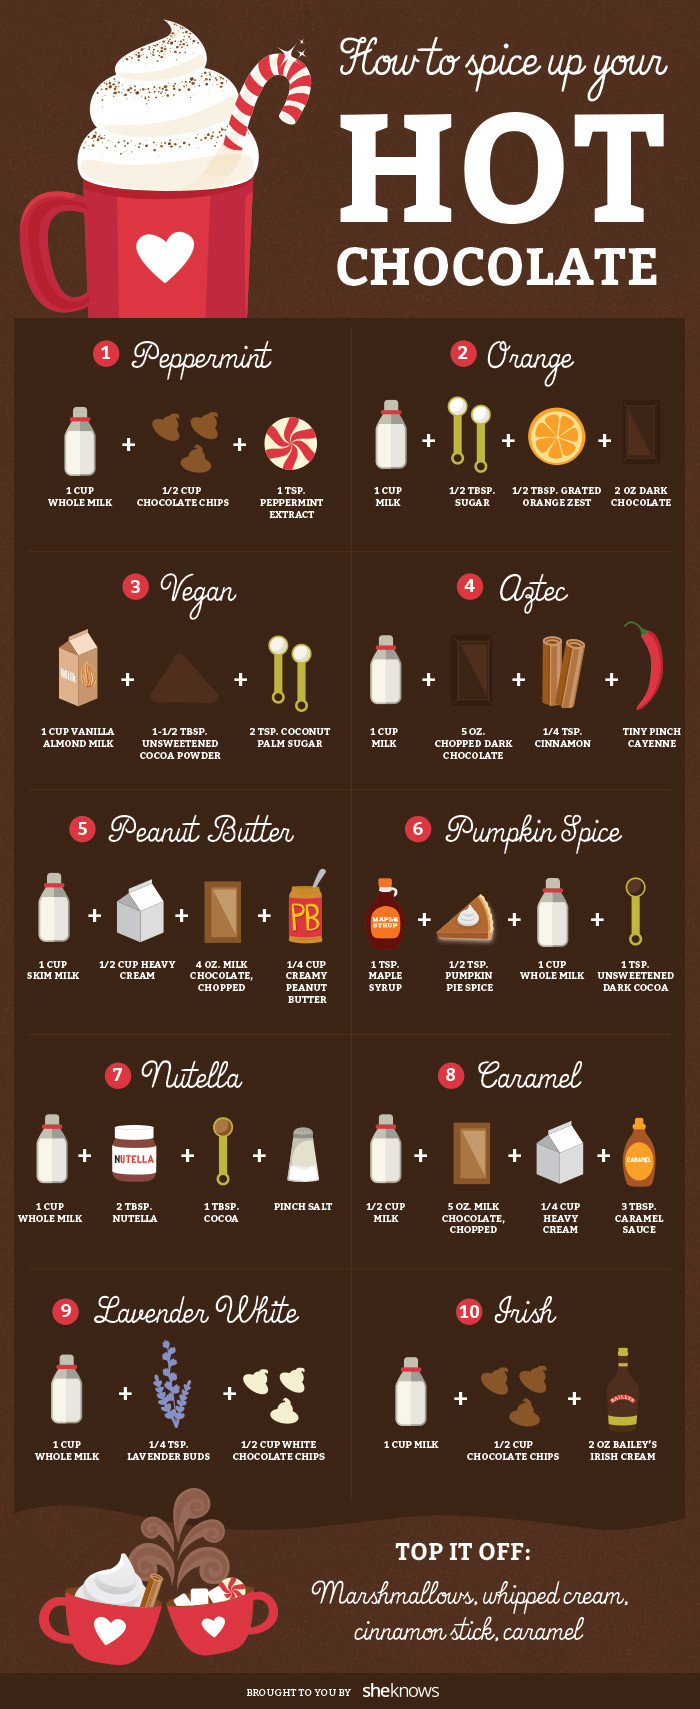 How To Make Hot Chocolate
 Every Way You Can Make Hot Chocolate